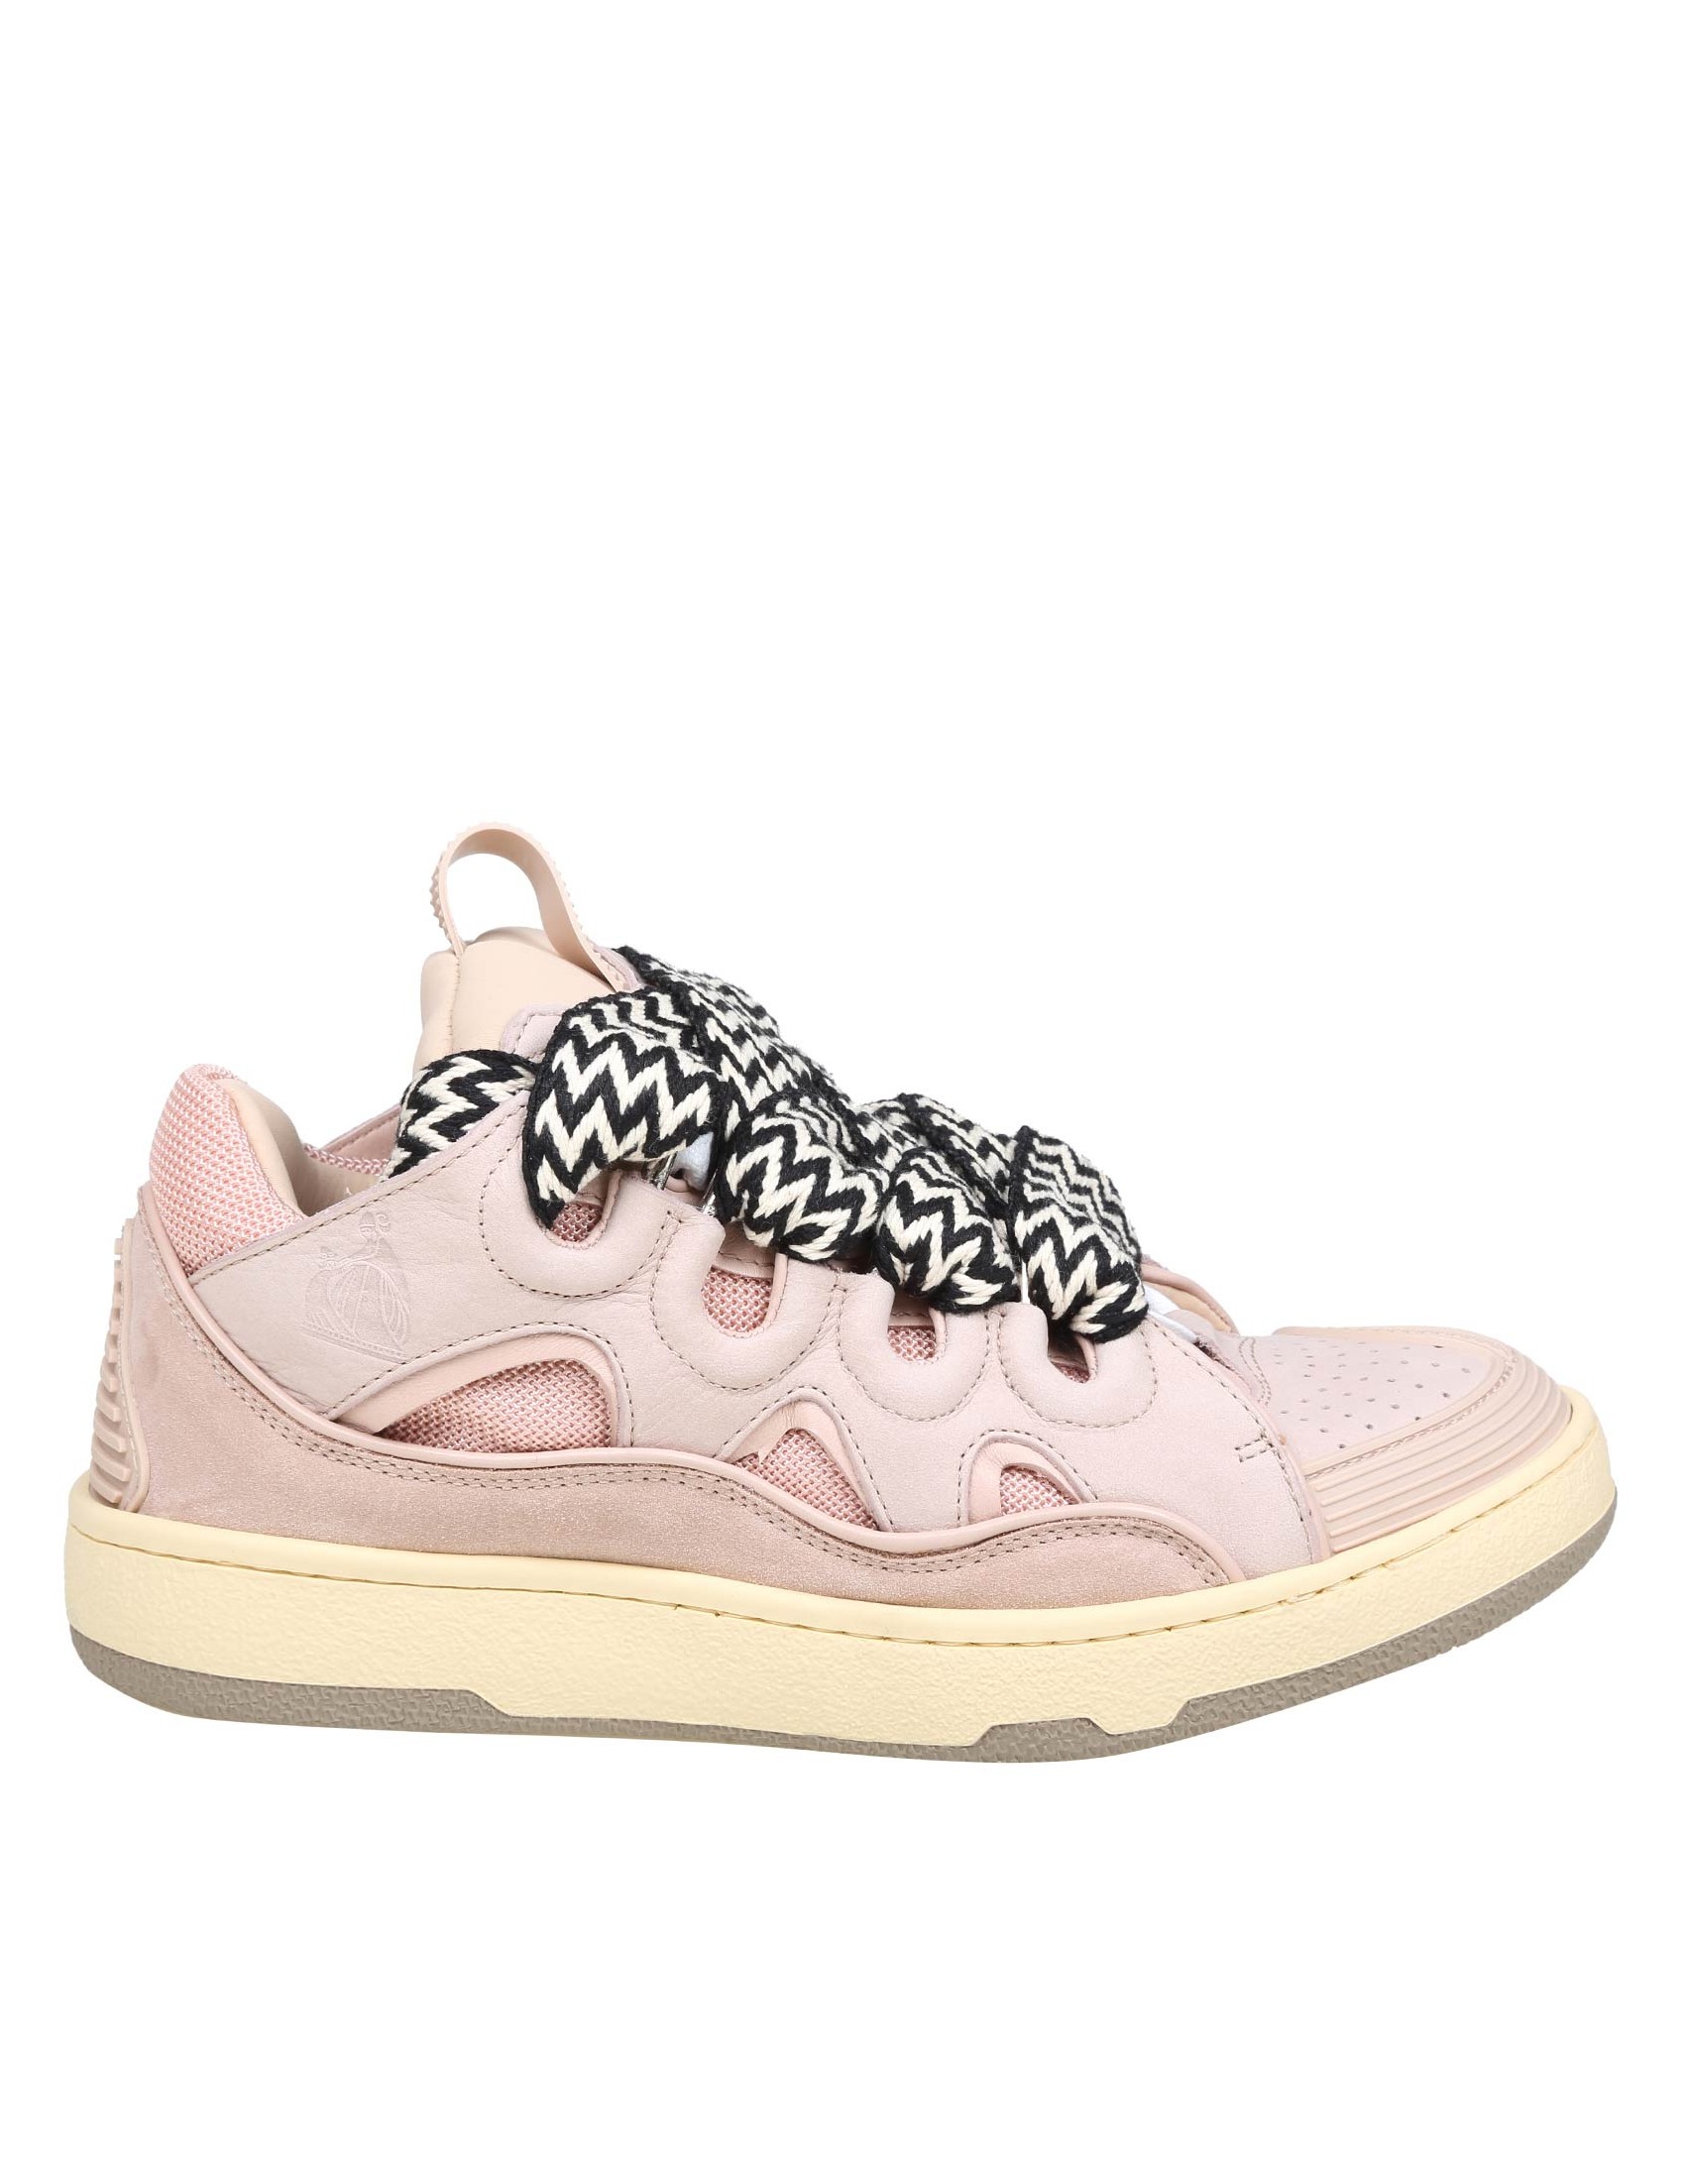 LANVIN CURB SNEAKERS IN WHITE AND PINK LEATHER